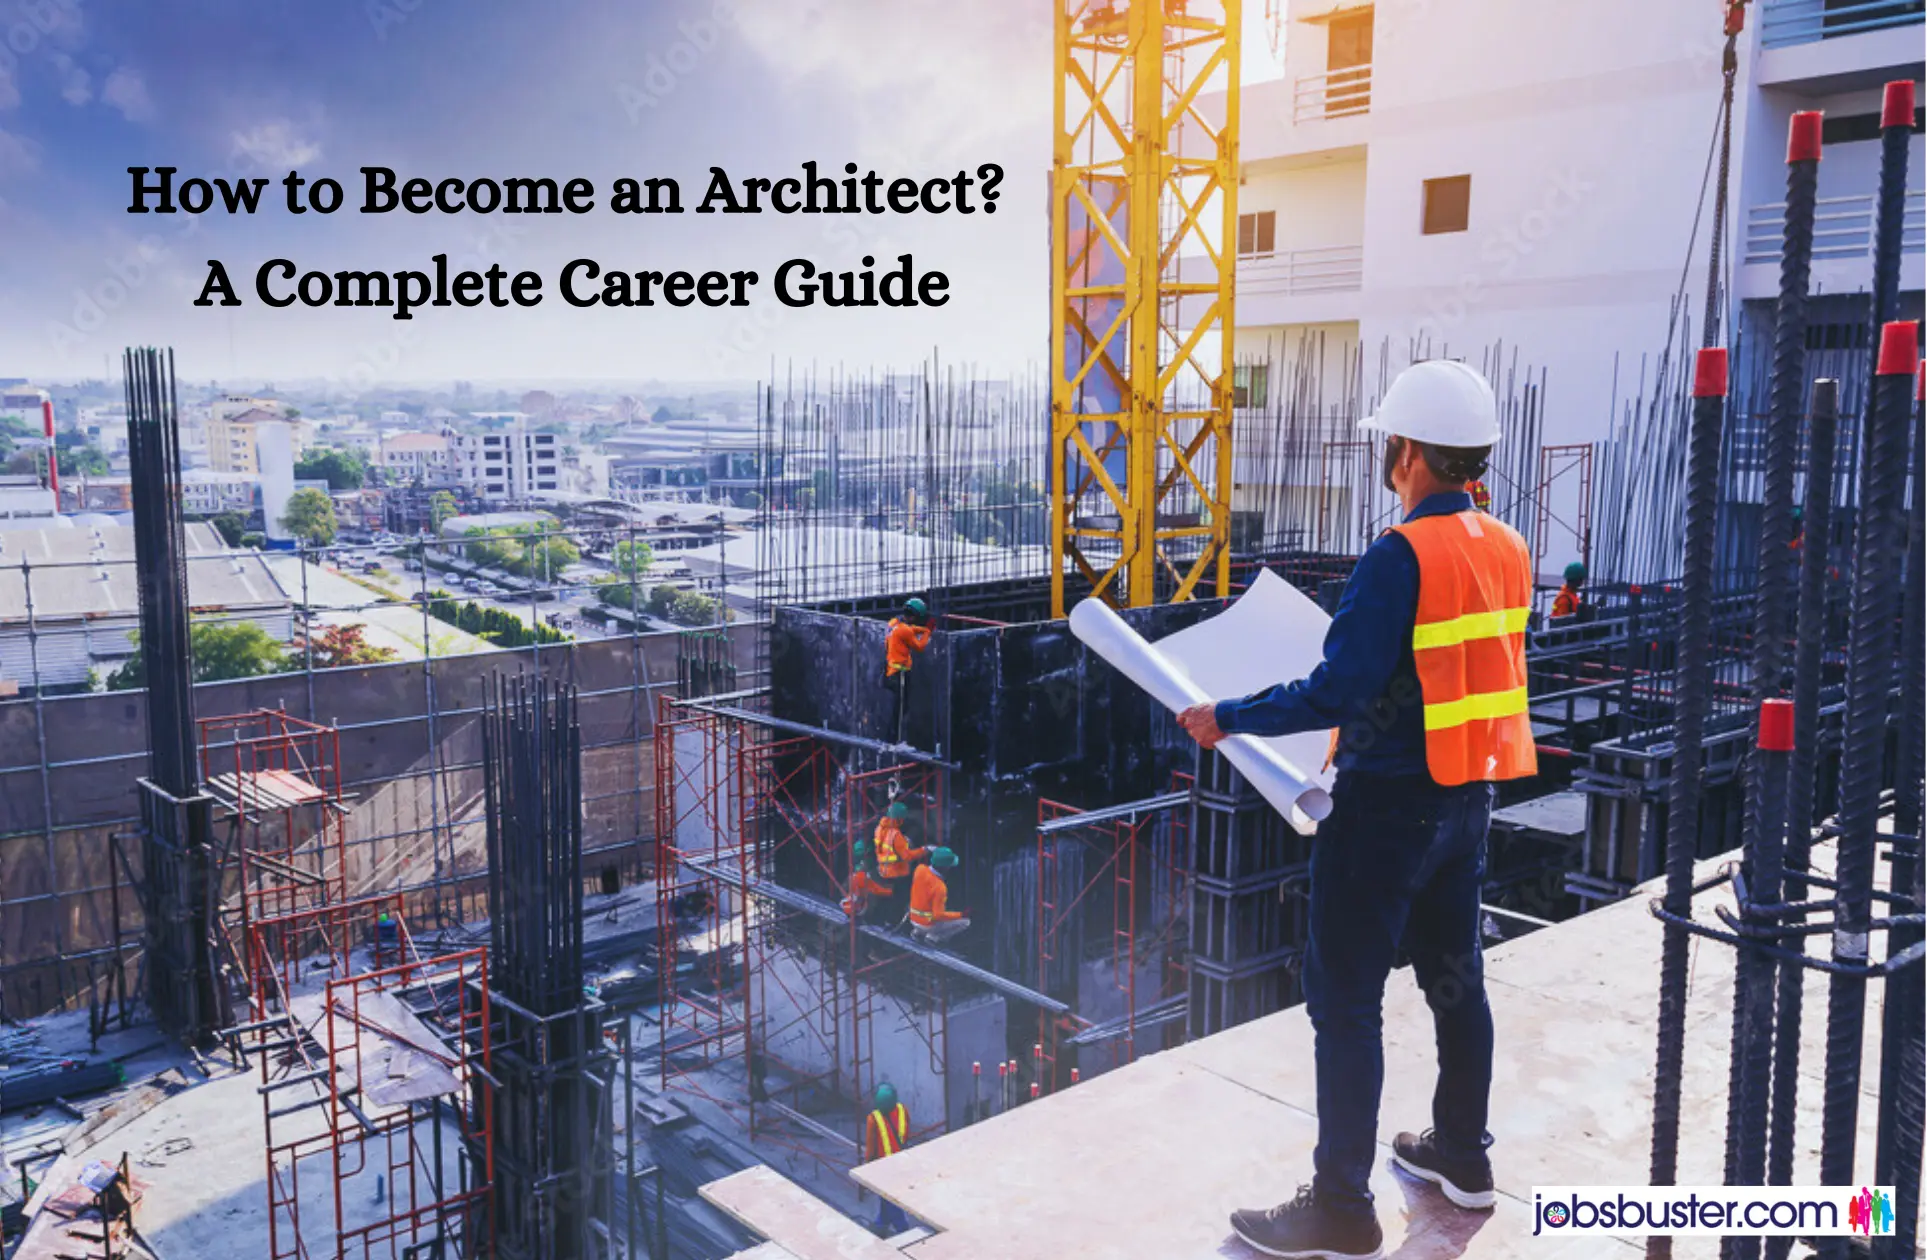 How to Become an Architect? A Complete Career Guide